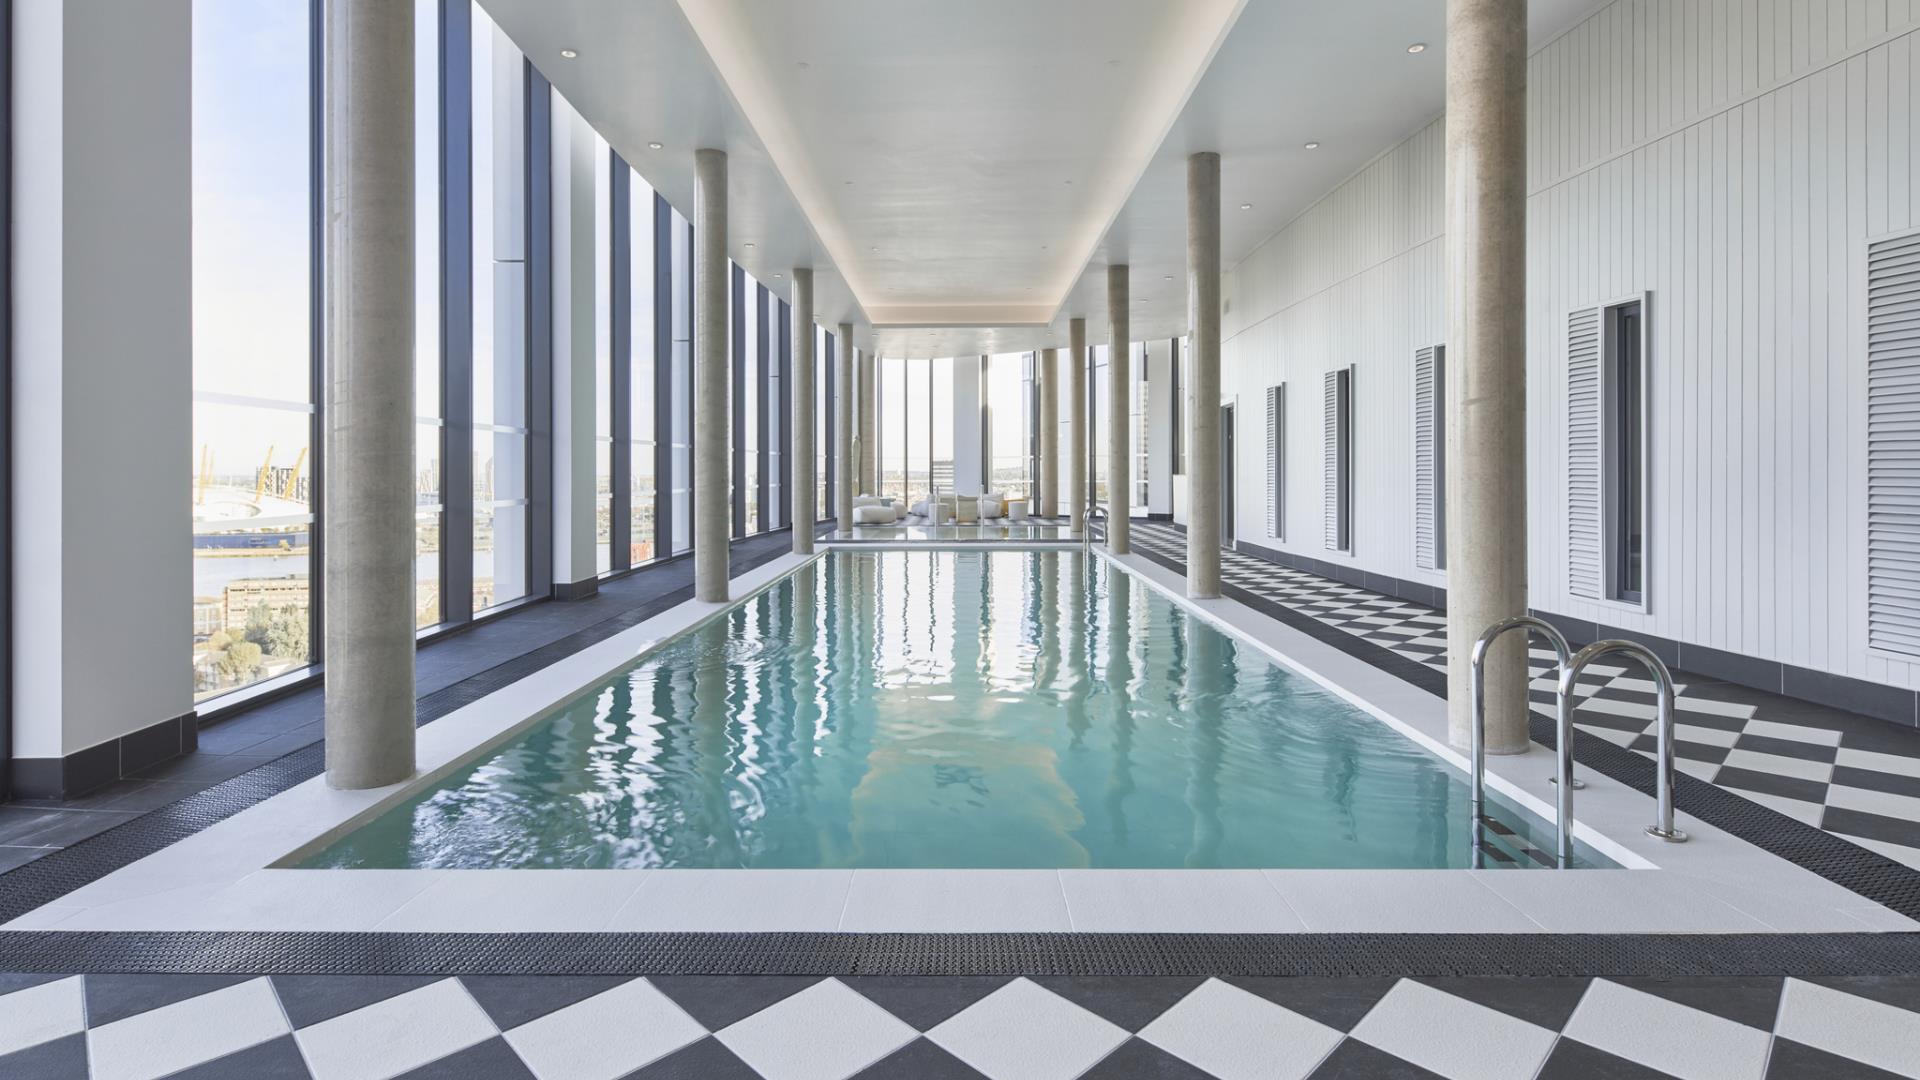 The beautiful pool at The Collective Canary Wharf with views across London.